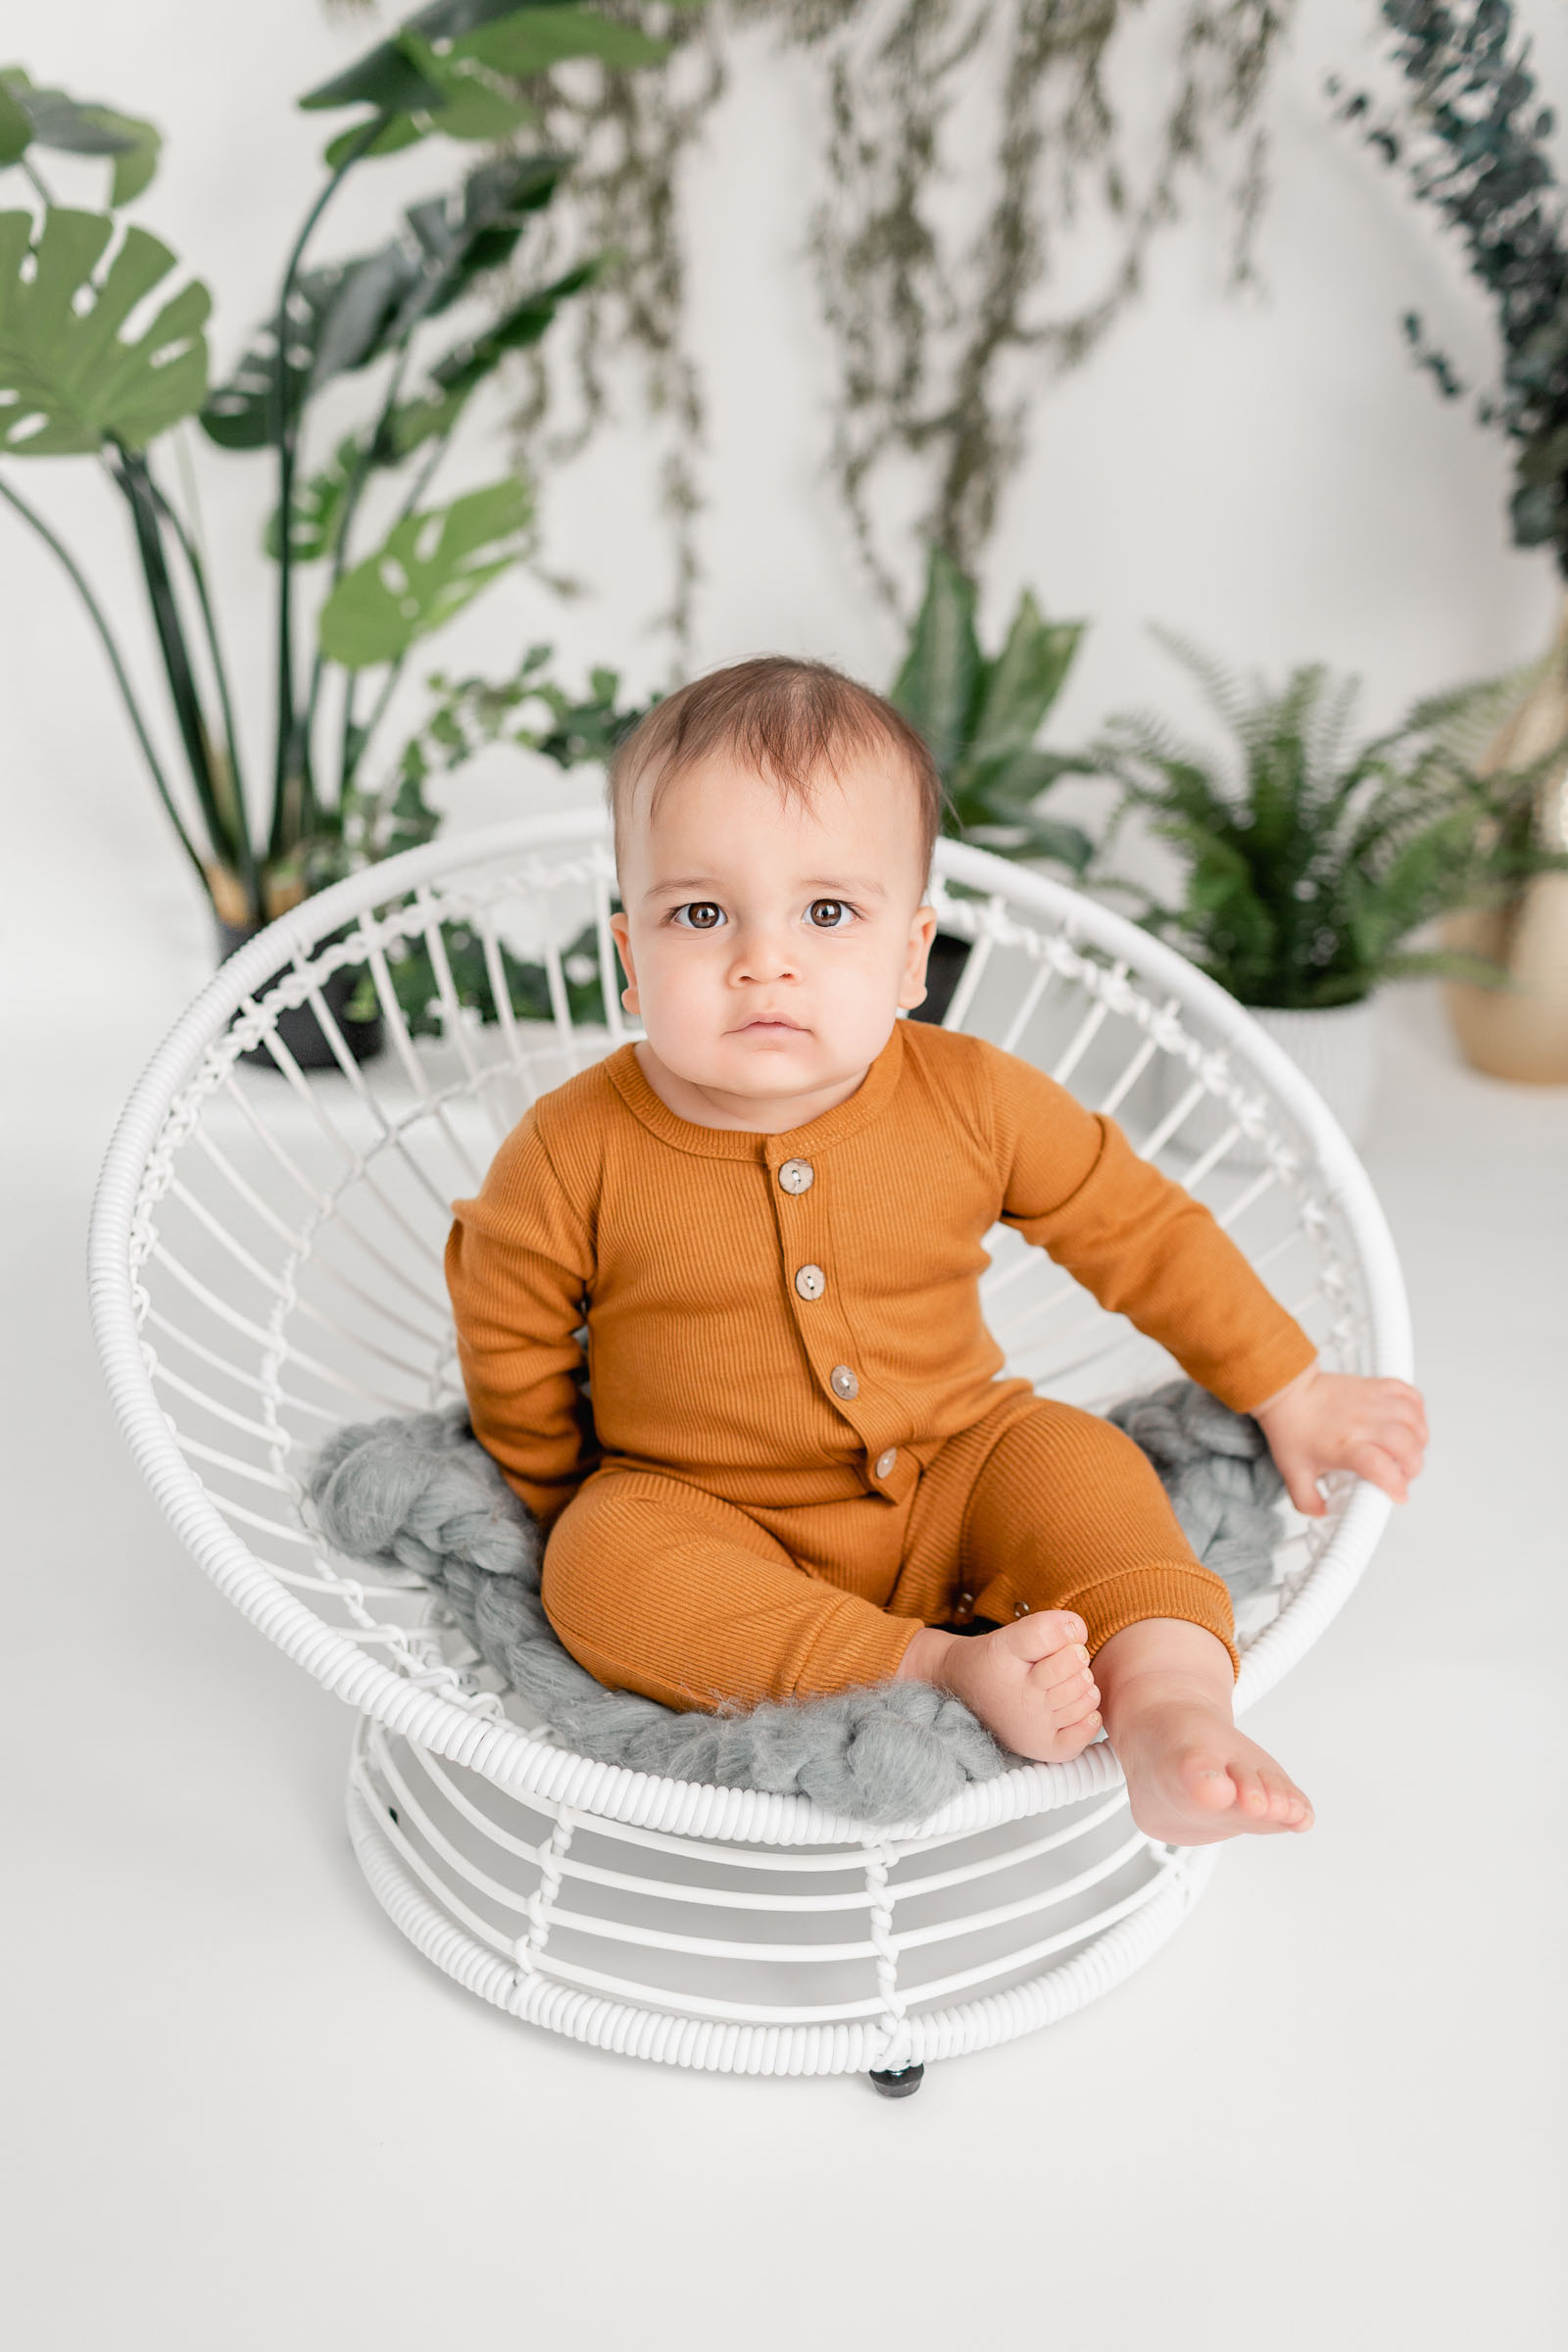 Baby boy dressed in an orange outfit on a white backdrop